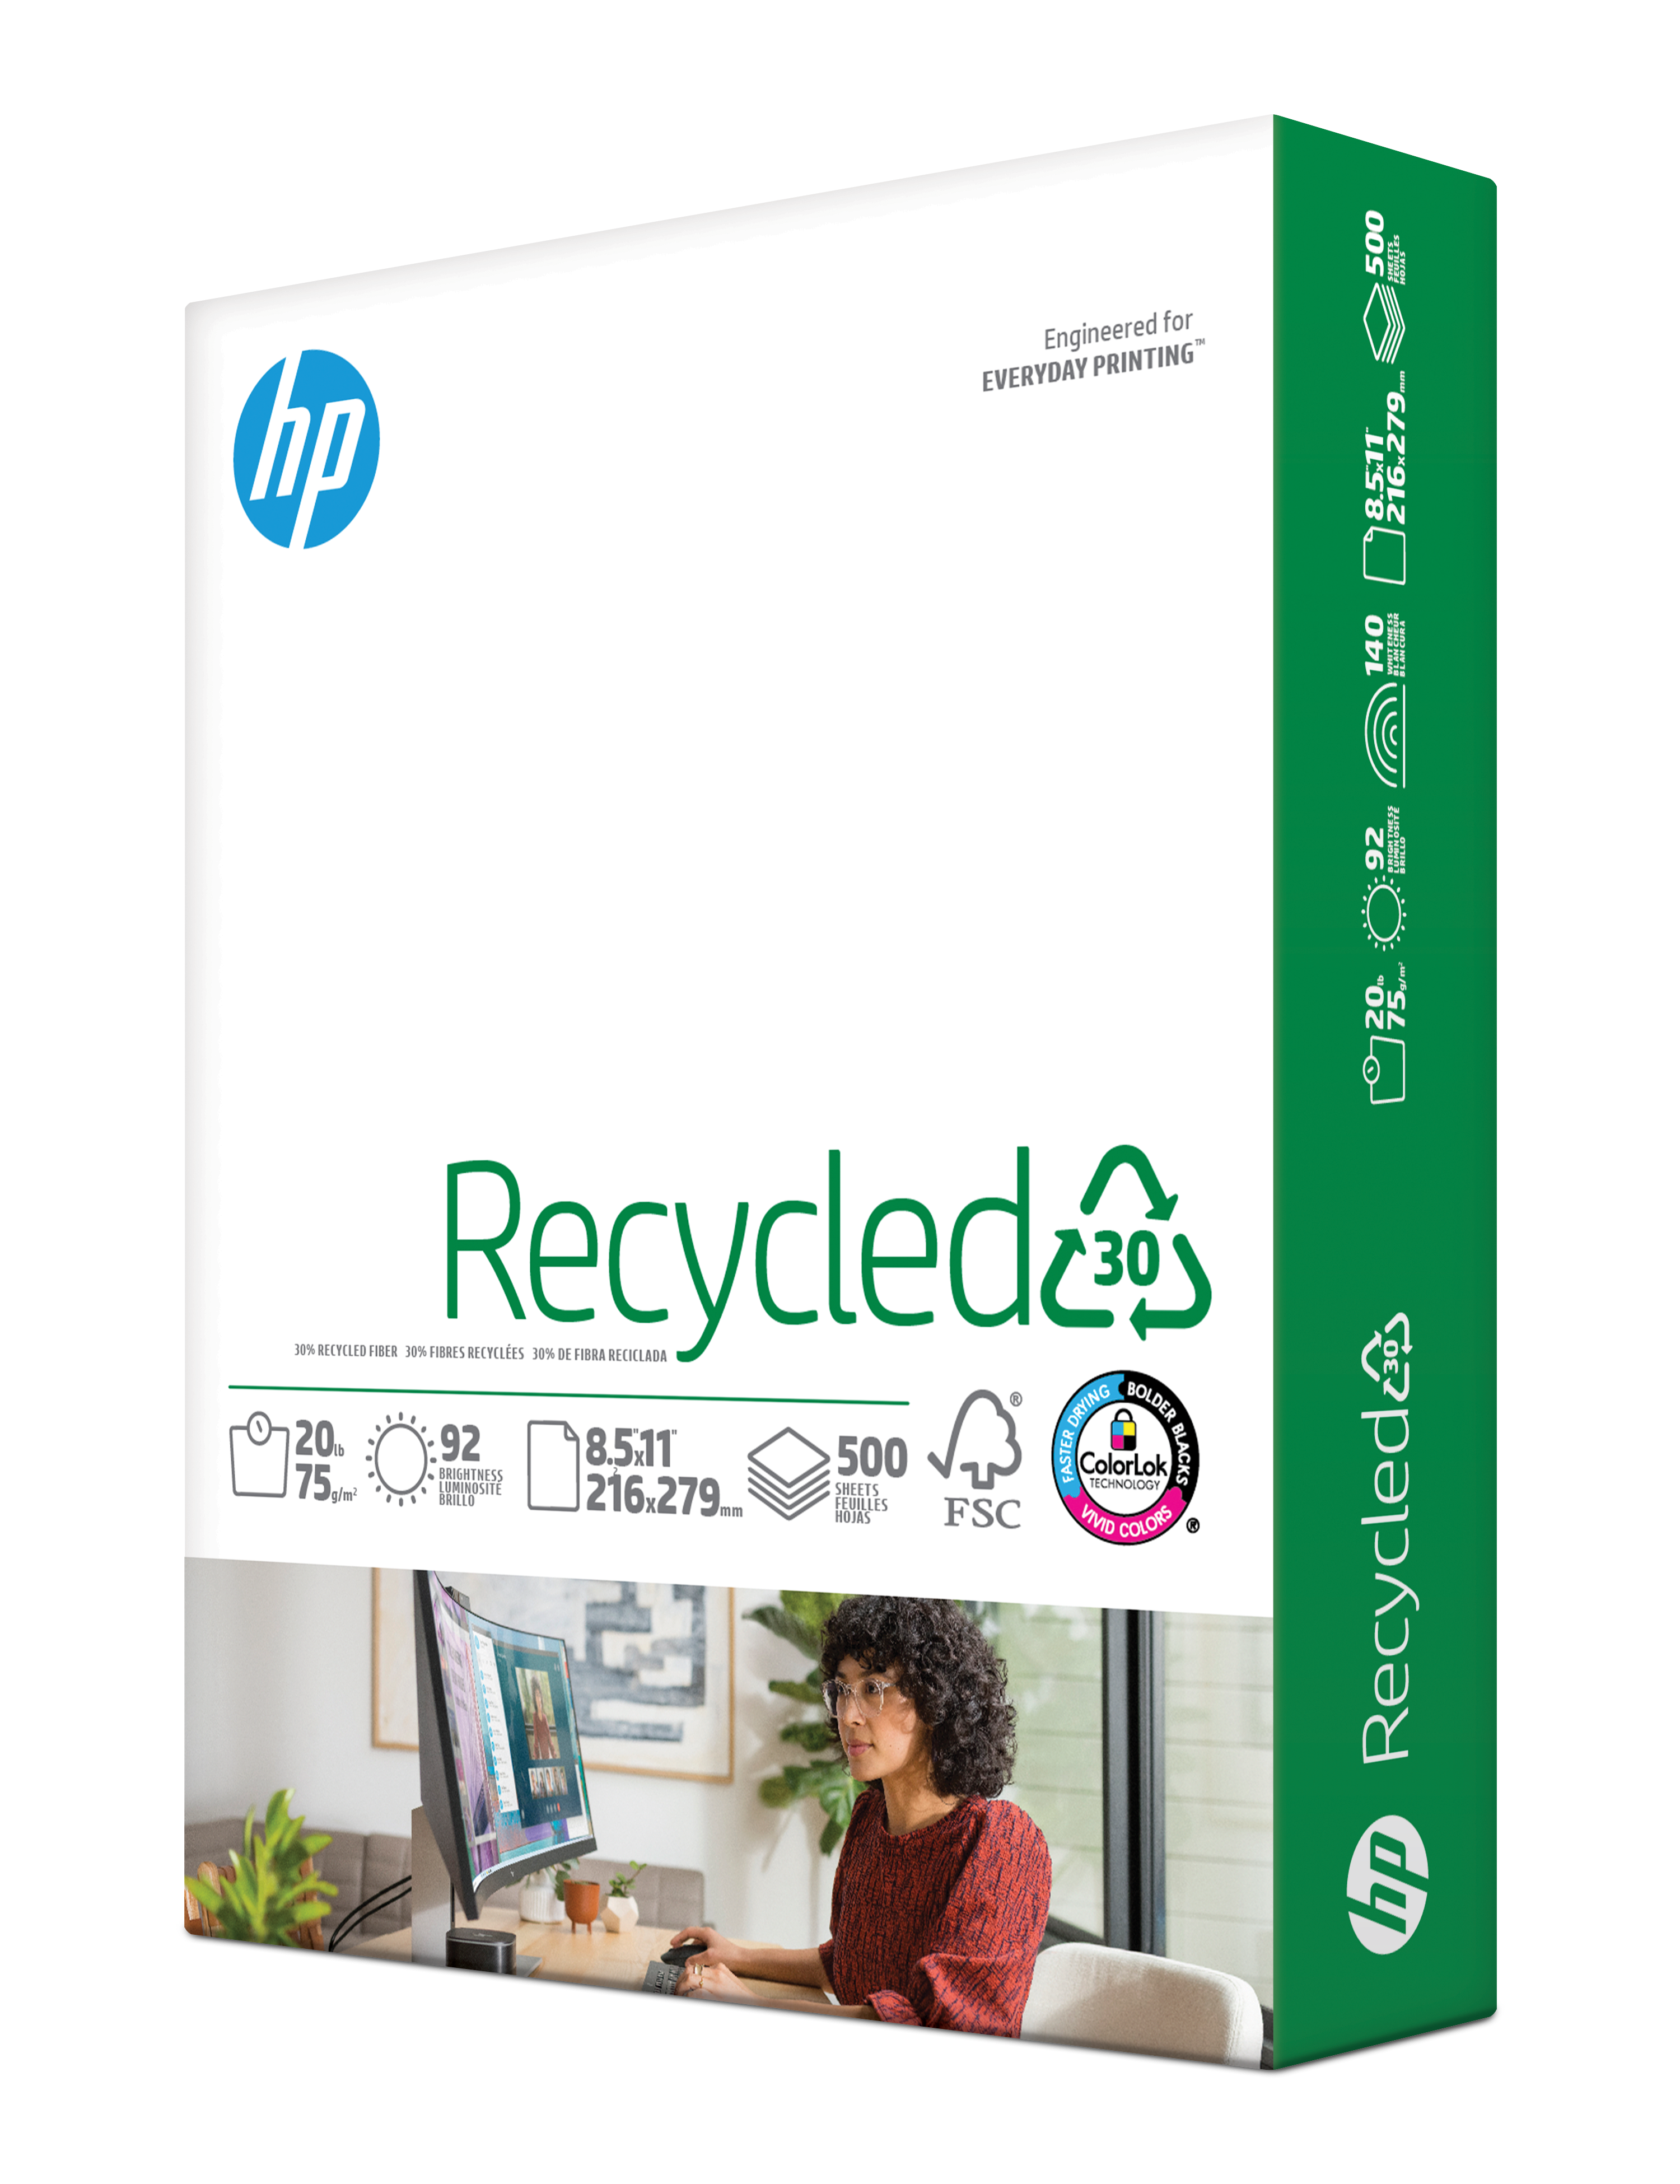 HP Recycled - HP Papers